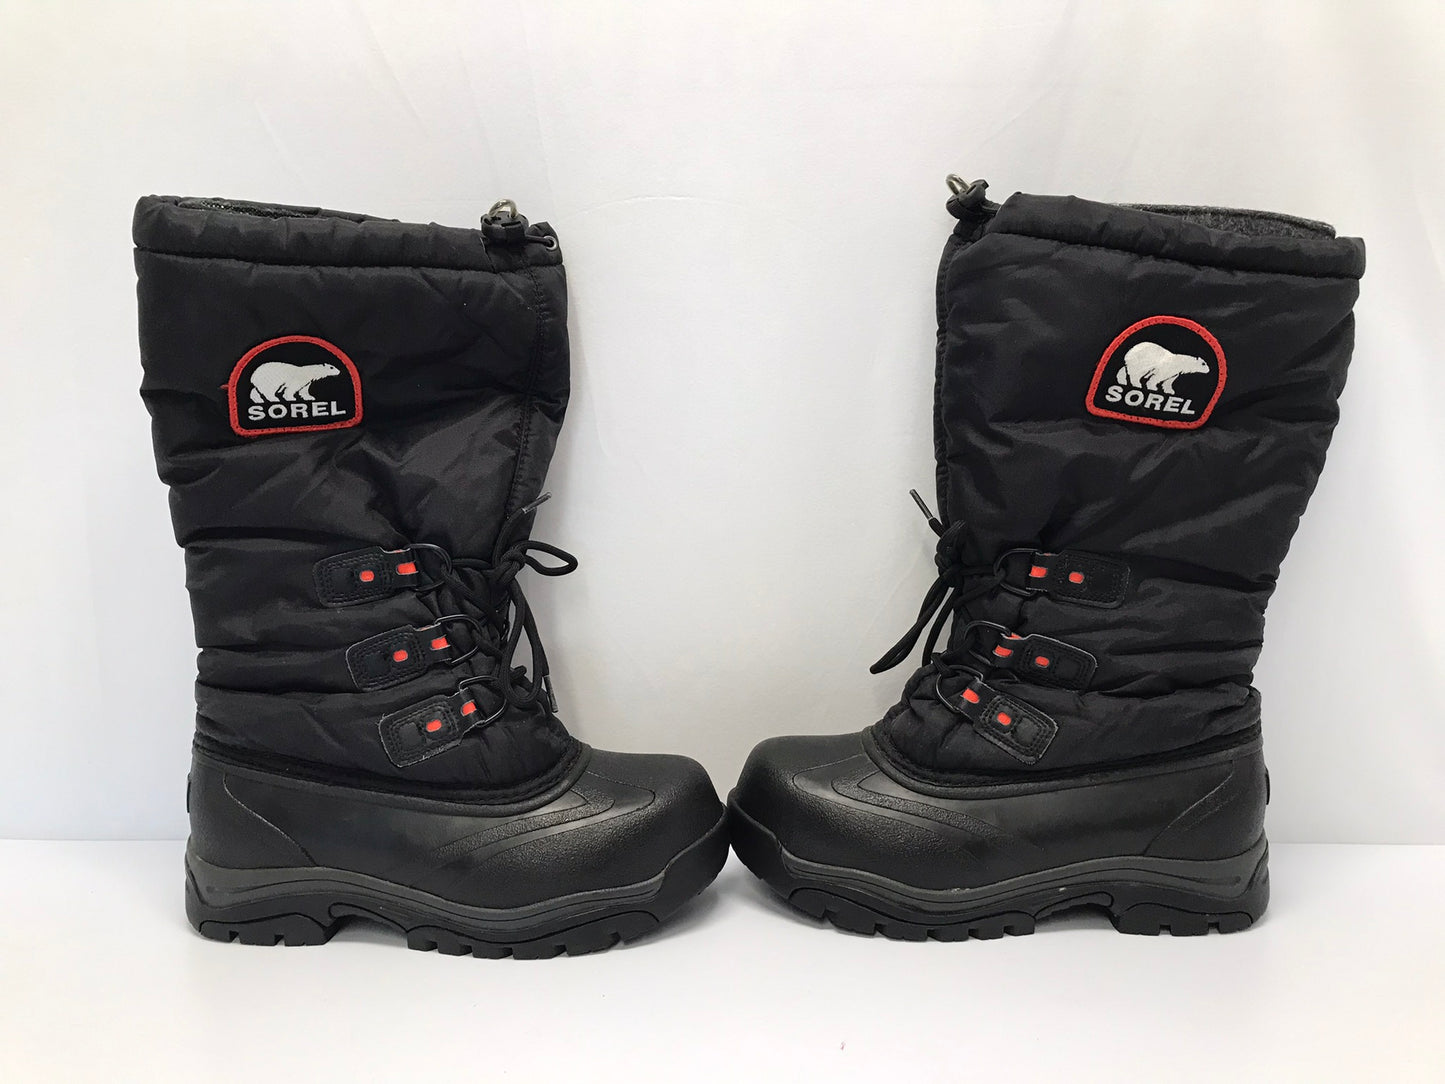 Winter Boots Ladies Size 8 Sorel Omni Heat With Liners As New Excellent Black Orange